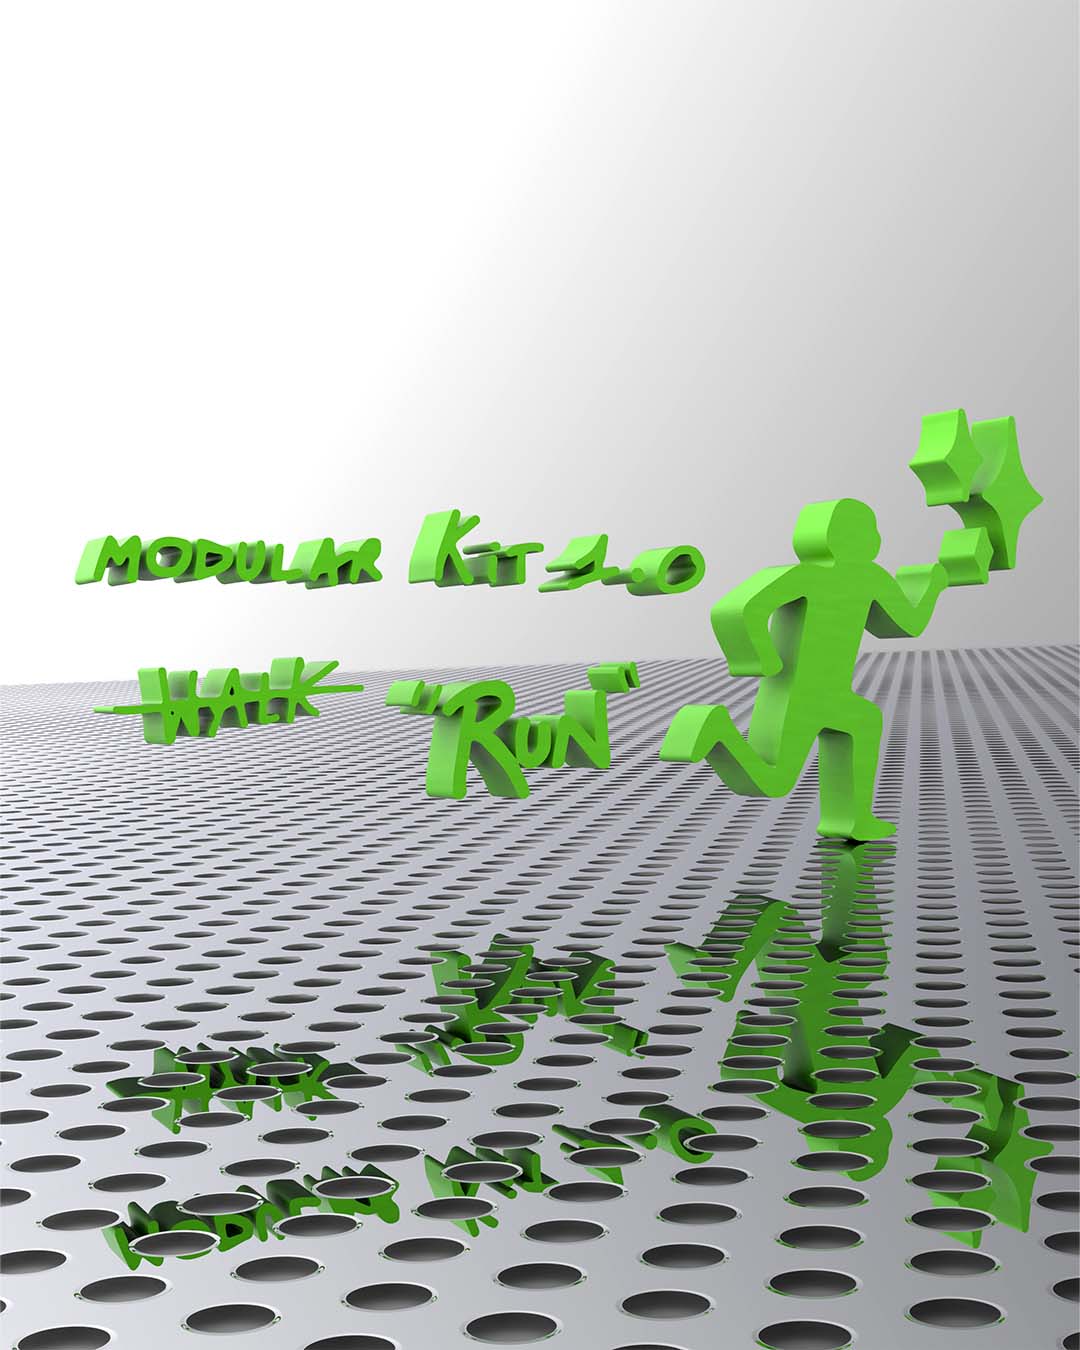 3D handwrite payoff.jpg image from XL-FRAMEWORK RAL7000STUDIO project created on 2022-12-15